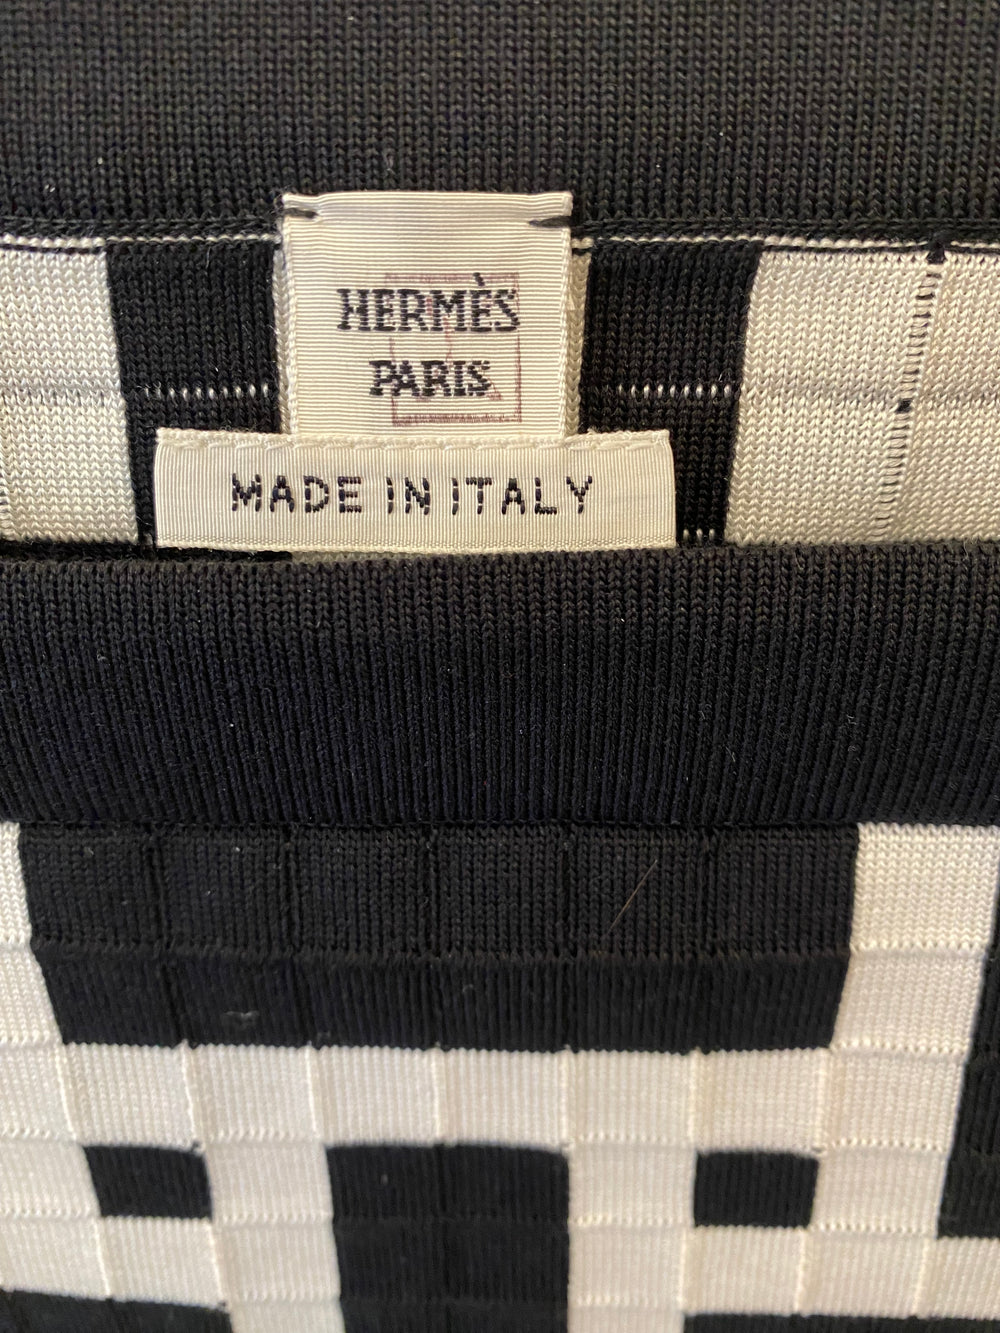 Pre Loved Hermes Black & Cream Mosaique Dress, Runway Collection,size38 uk10 (new)